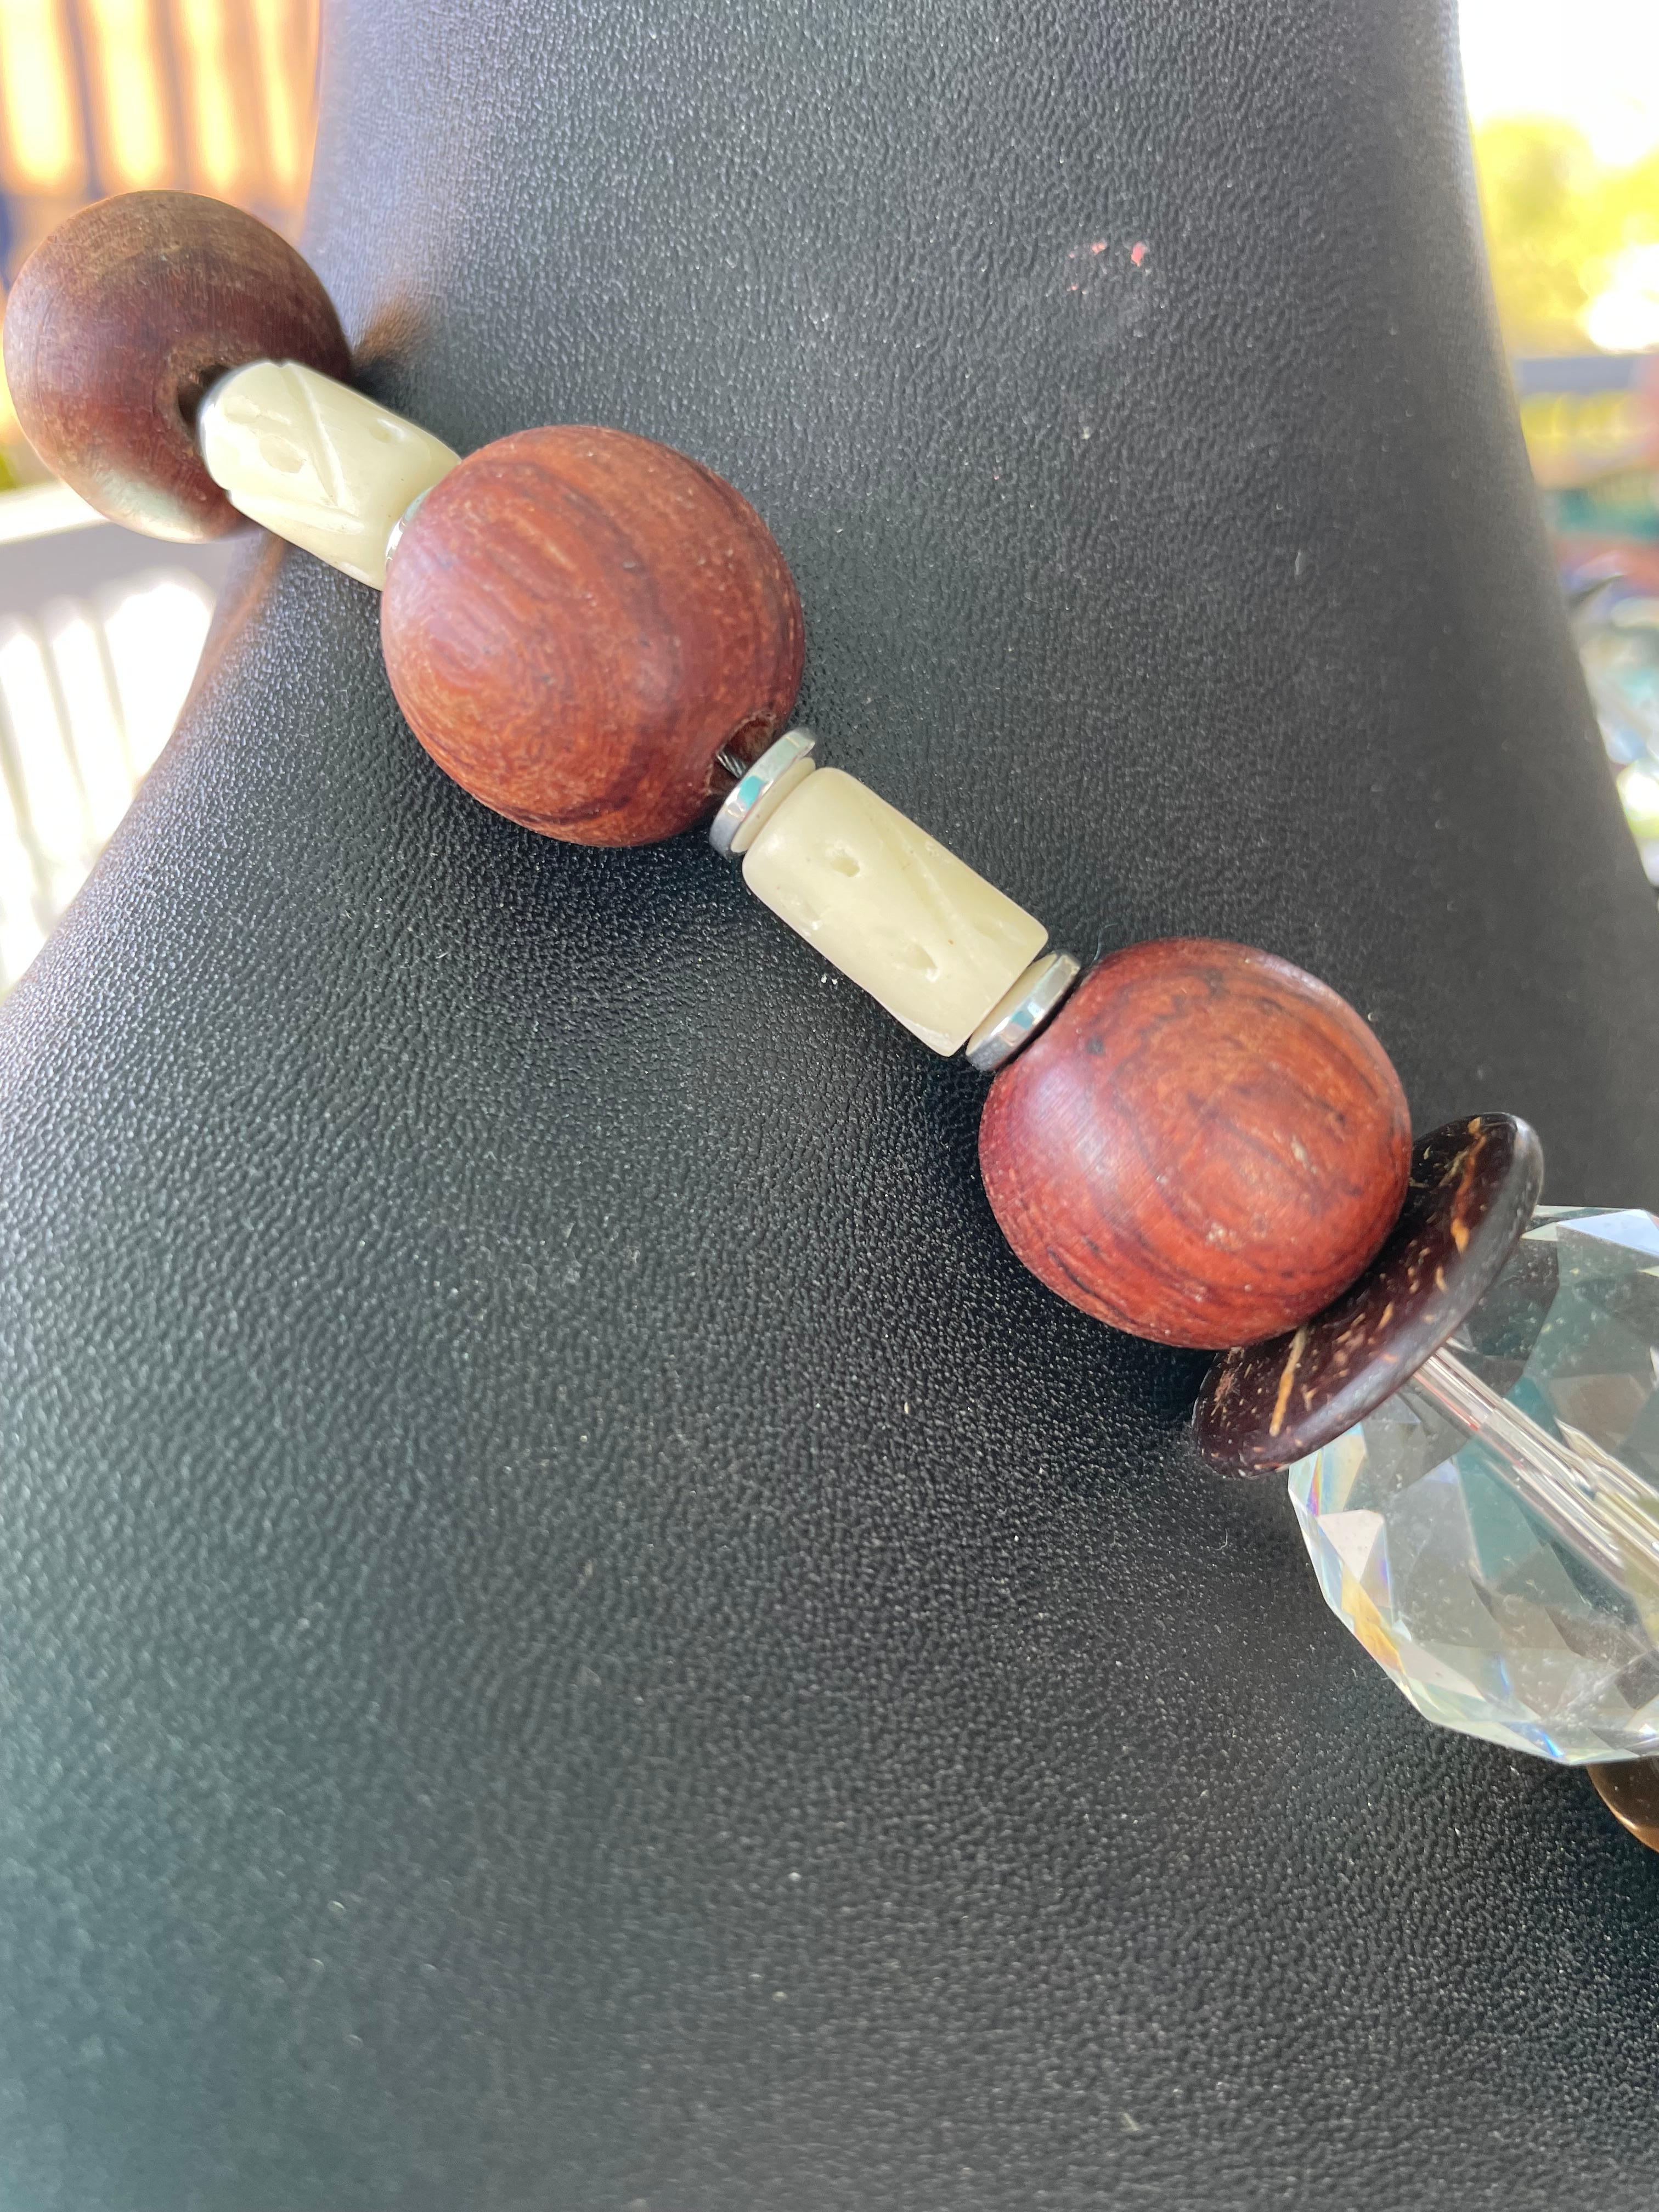 LB Vintage Resin Crystal Bone and Wood Bead Necklace on offer In Good Condition For Sale In Pittsburgh, PA